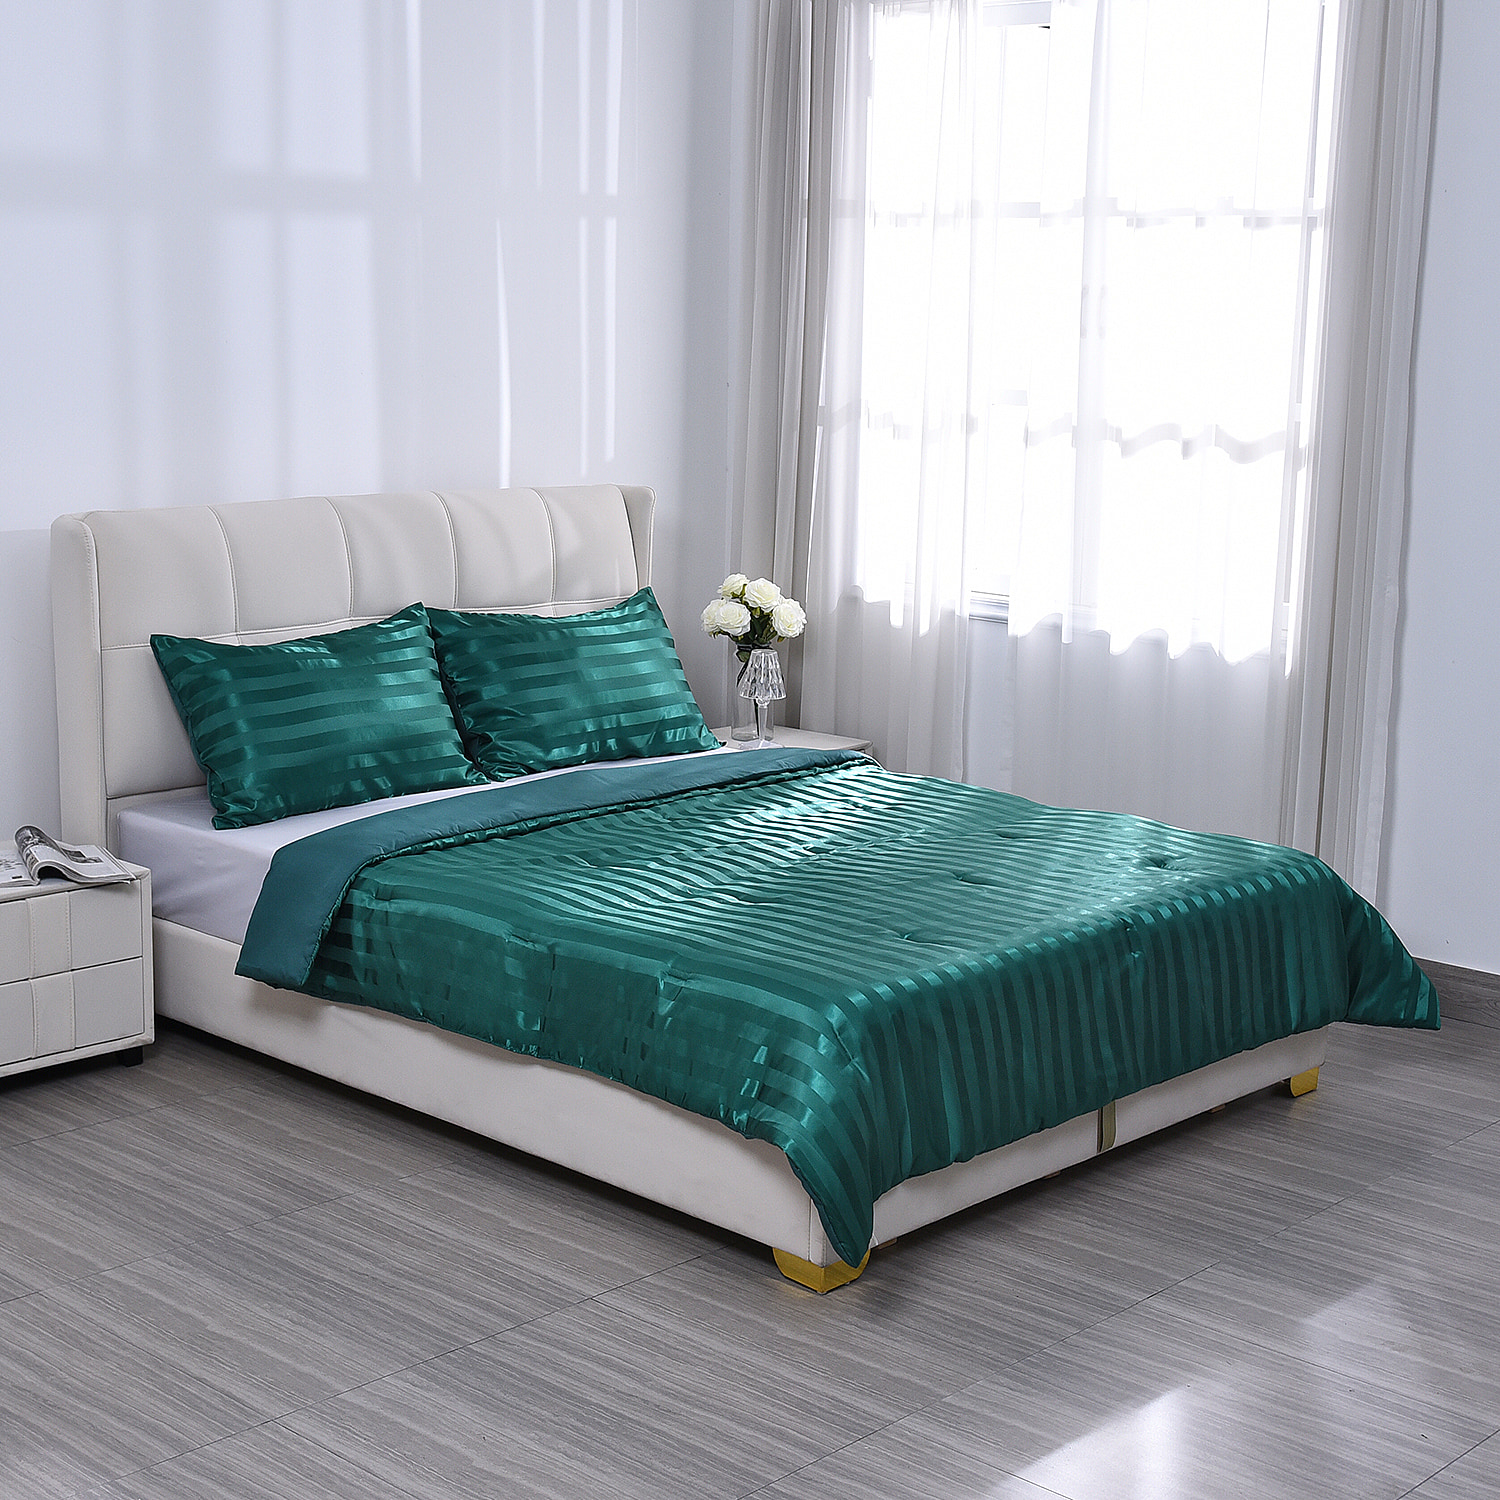 Polyester-Patterned-Comforter-and-Duvet-Size-200x1-cm-Green-White